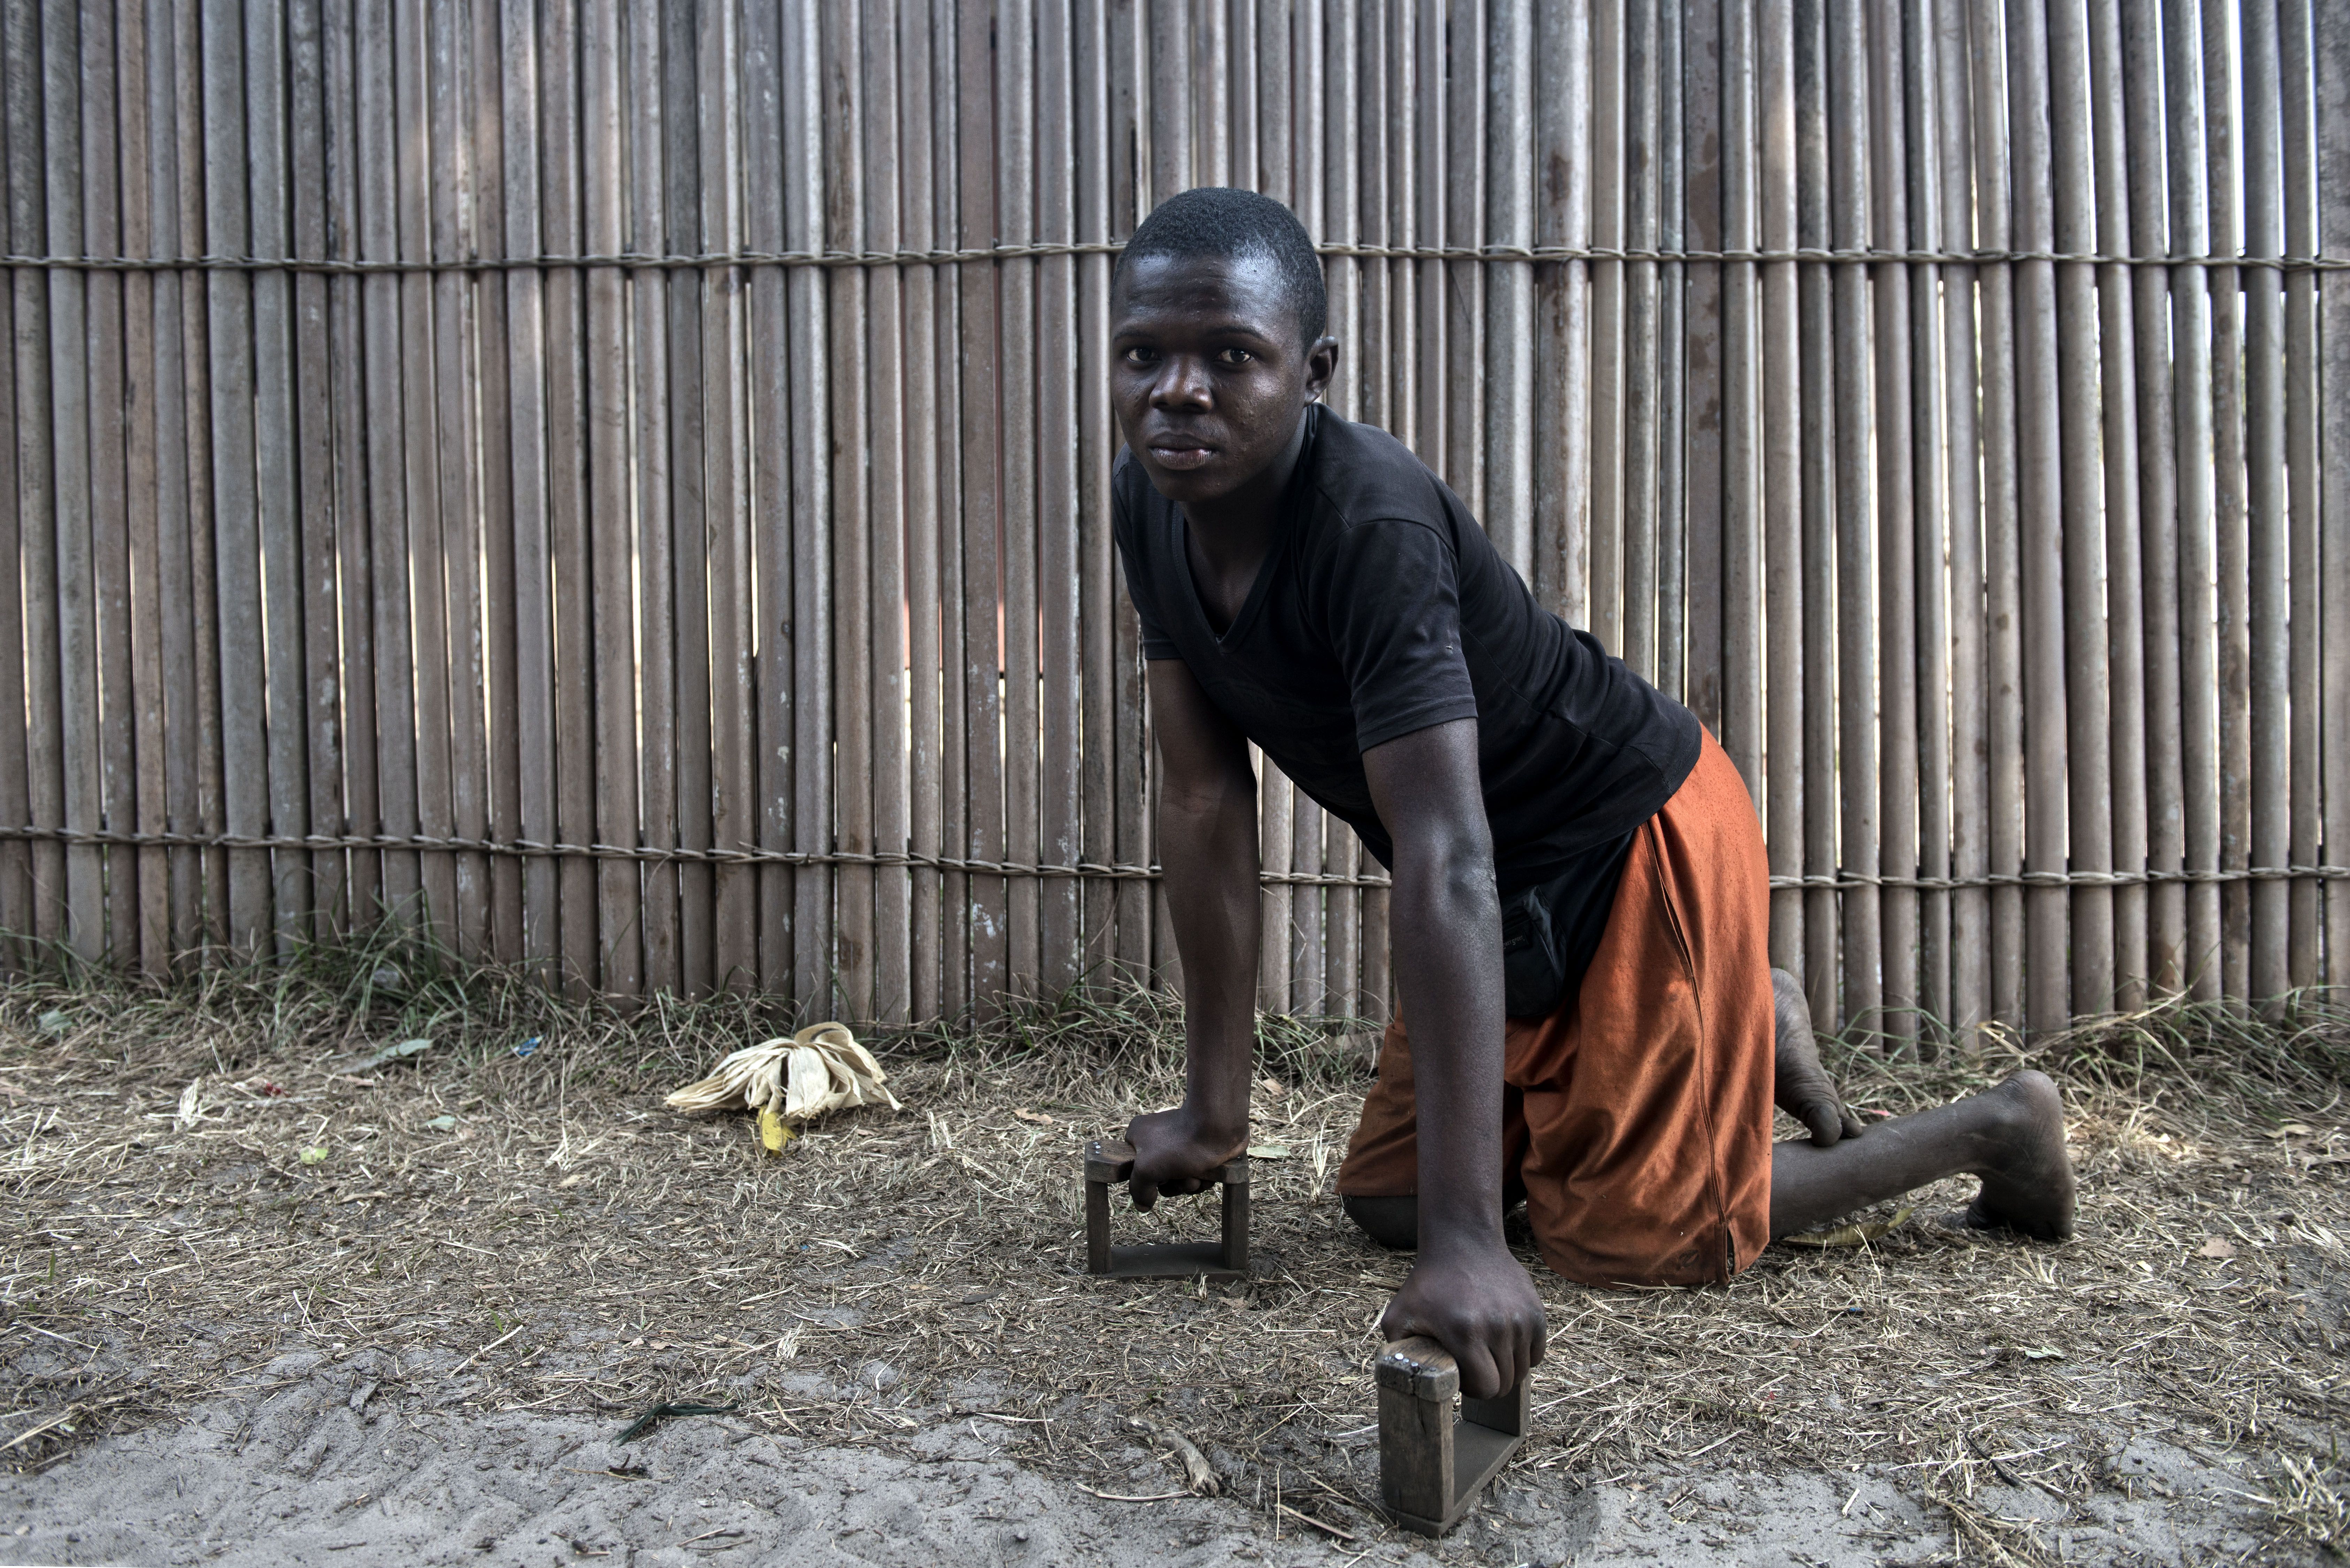 Again Kakene, 18, has had Konzo since 2002 and relies on wooden blocks to drag himself to the market and visit friends. He is the only one in his family with Konzo. Image by Neil Brandvold. DRC, 2016.